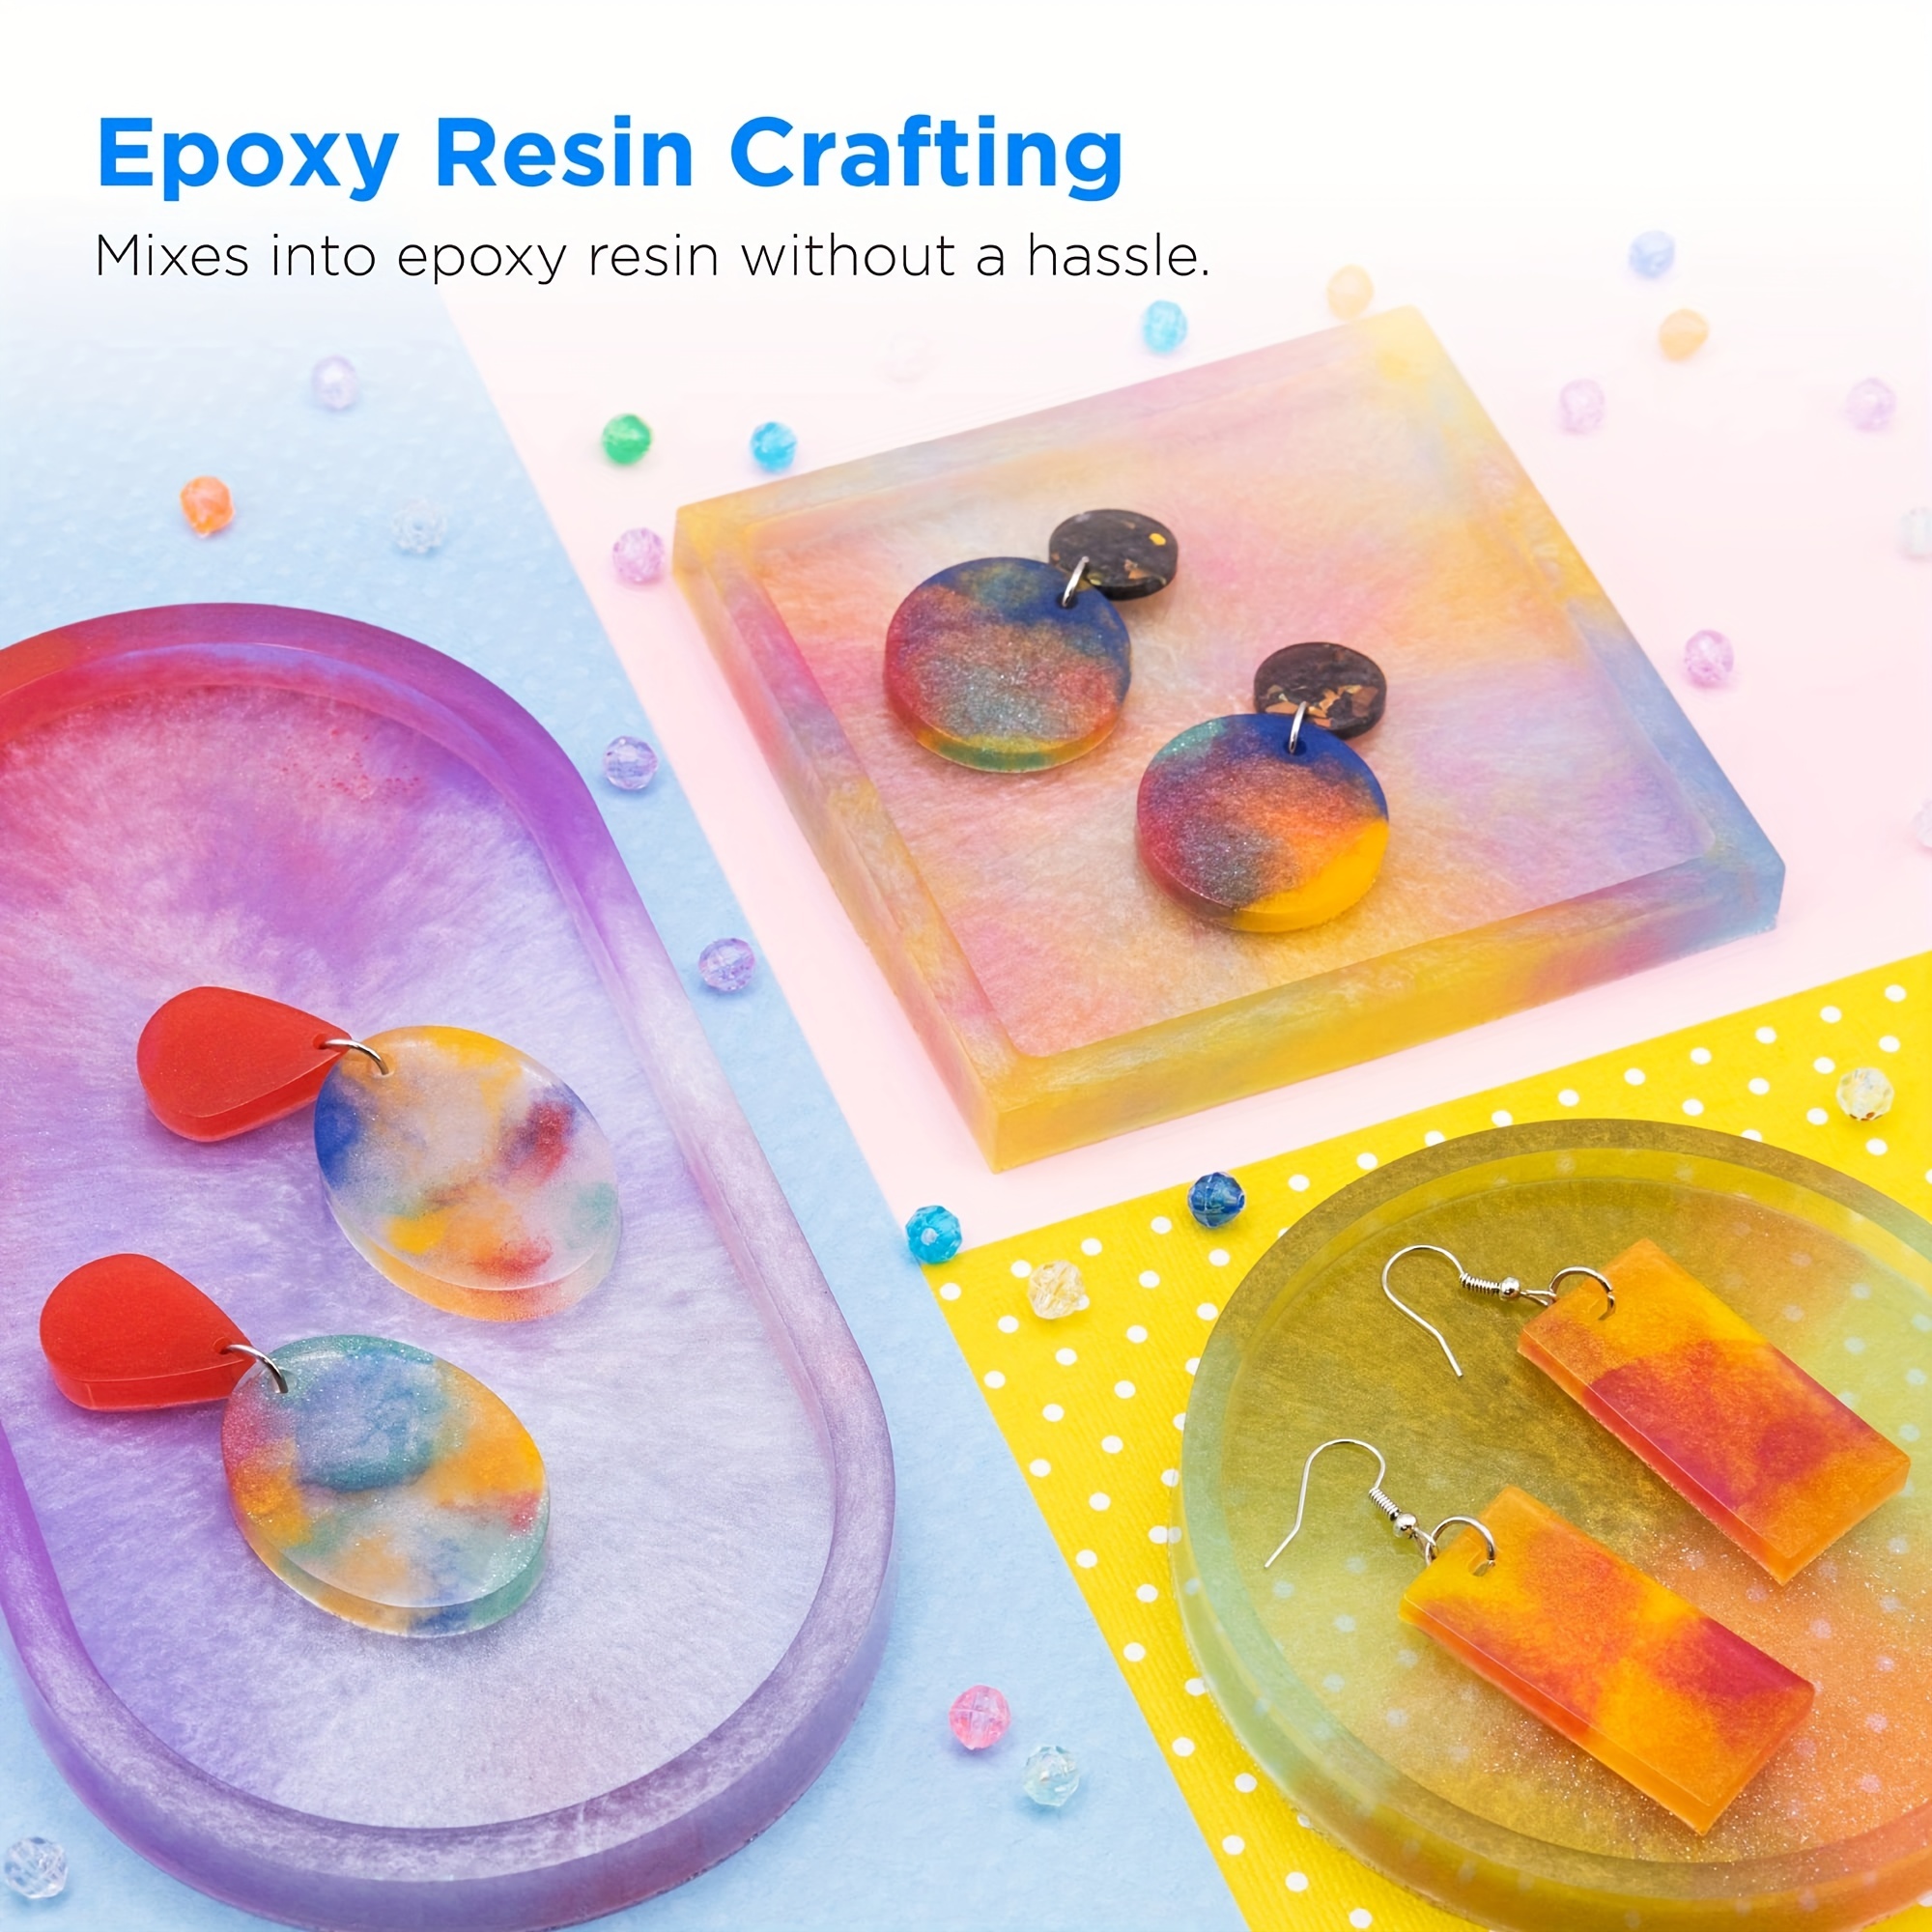 Crafts & Hobbies - Resin - Mica and Other Mediums - Colorful Impressions